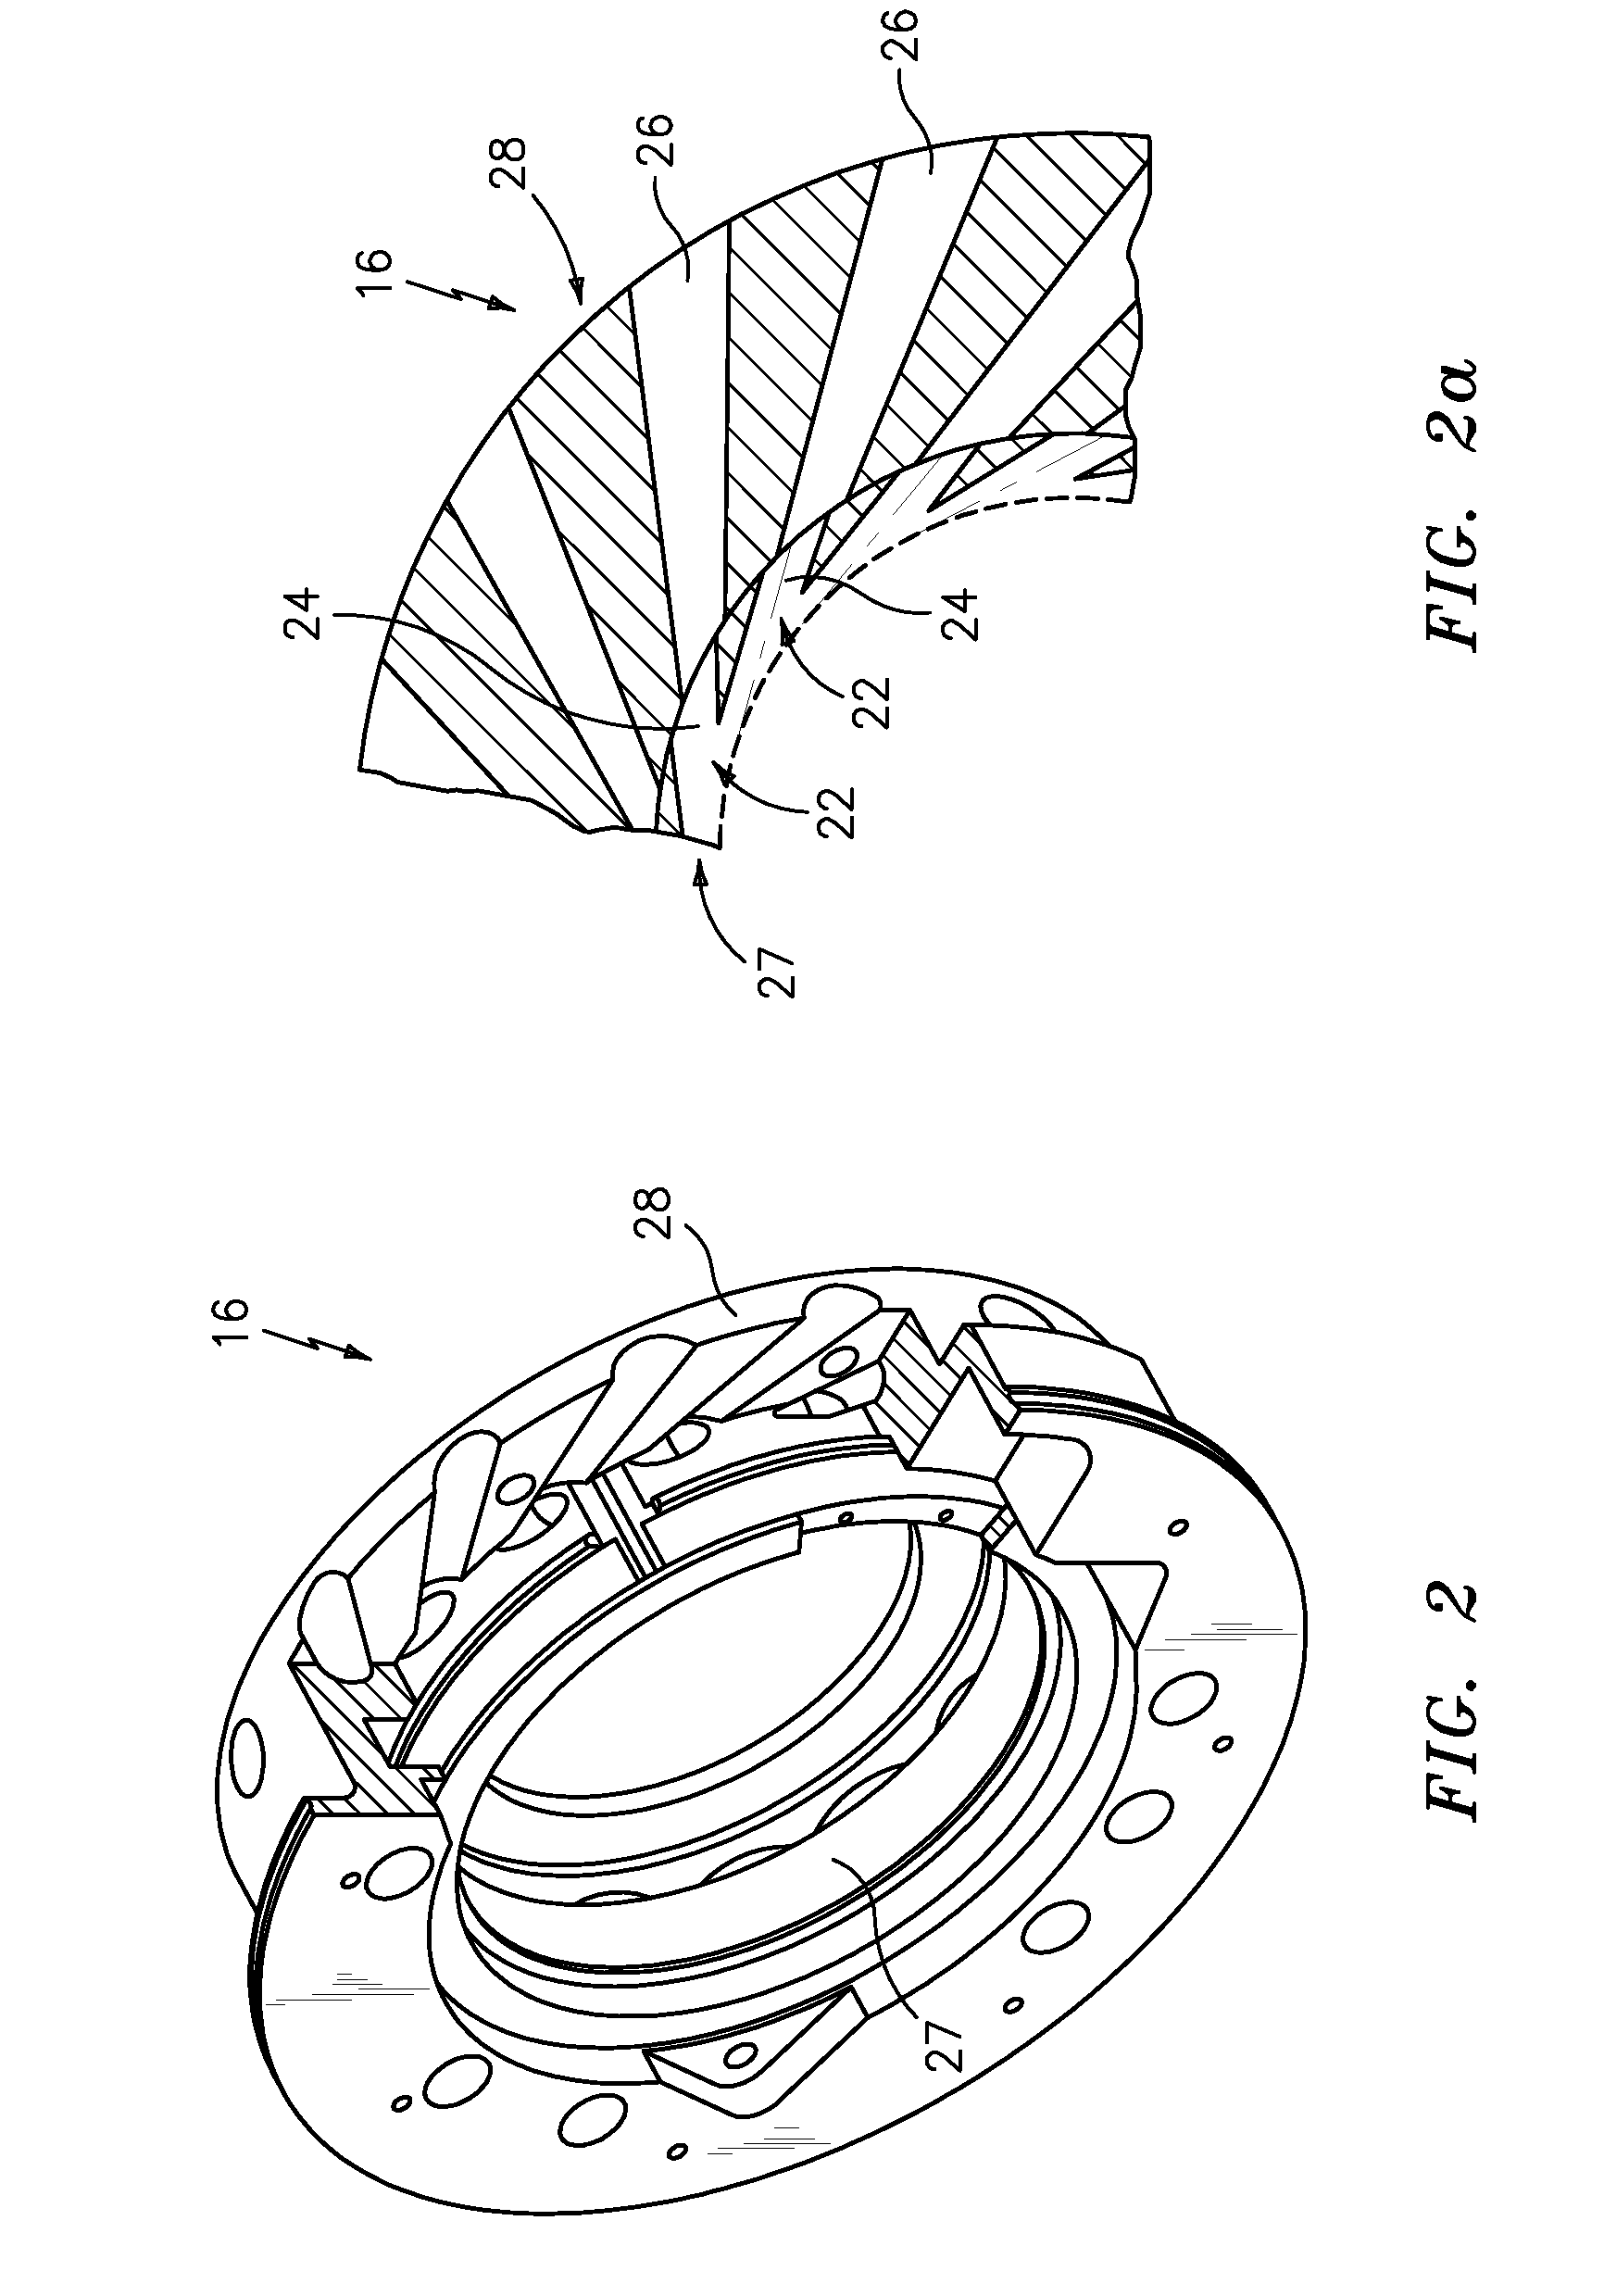 Centrifugal compressor performance by optimizing diffuser surge control and flow control device settings